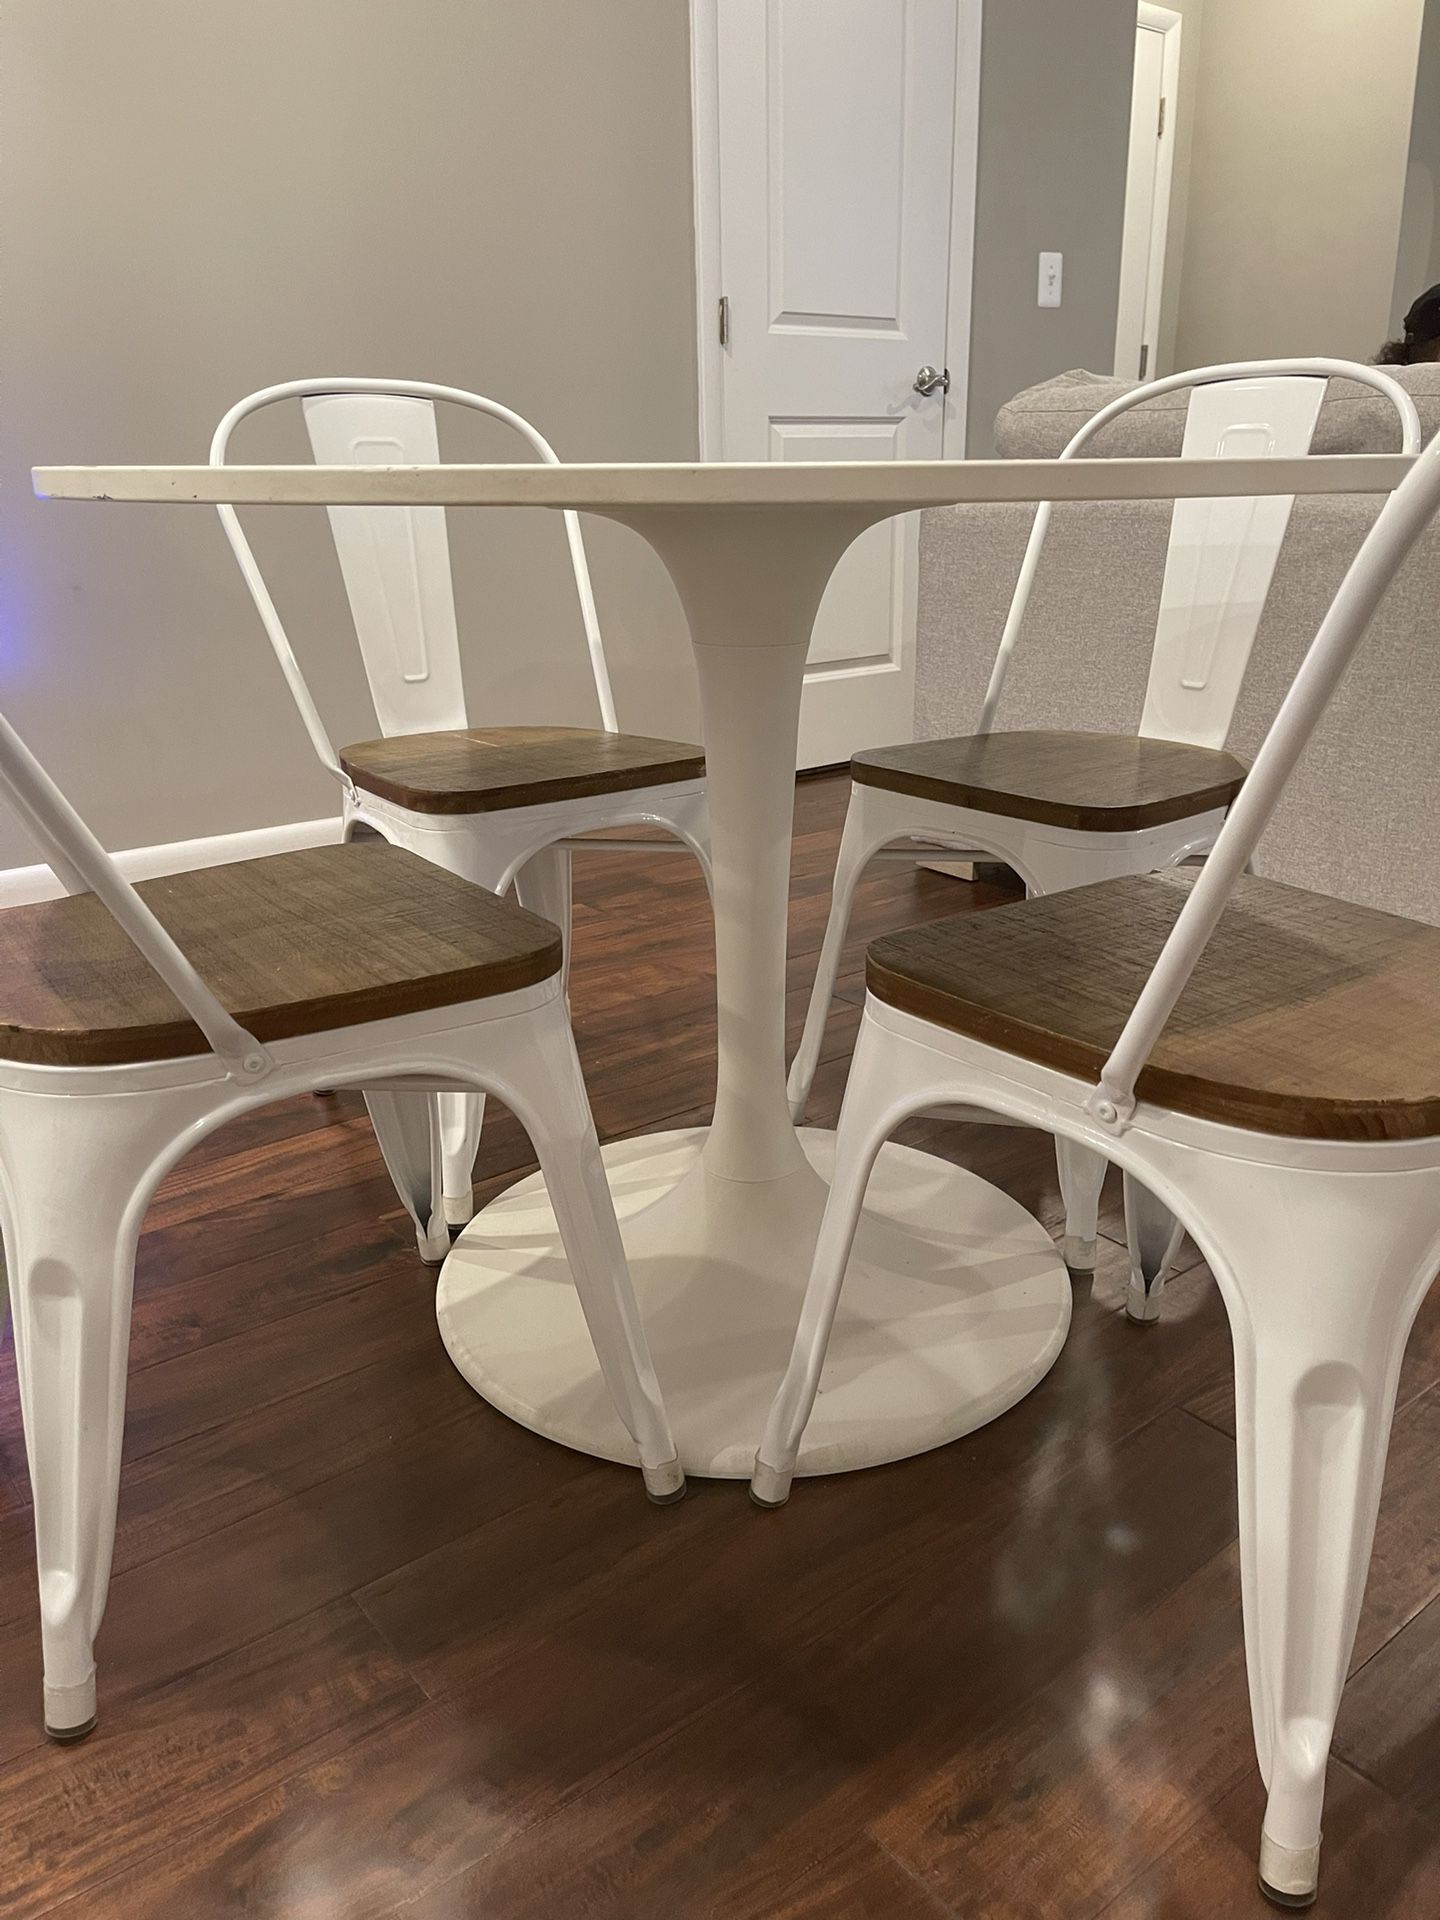 IKEA dining Table And Chairs